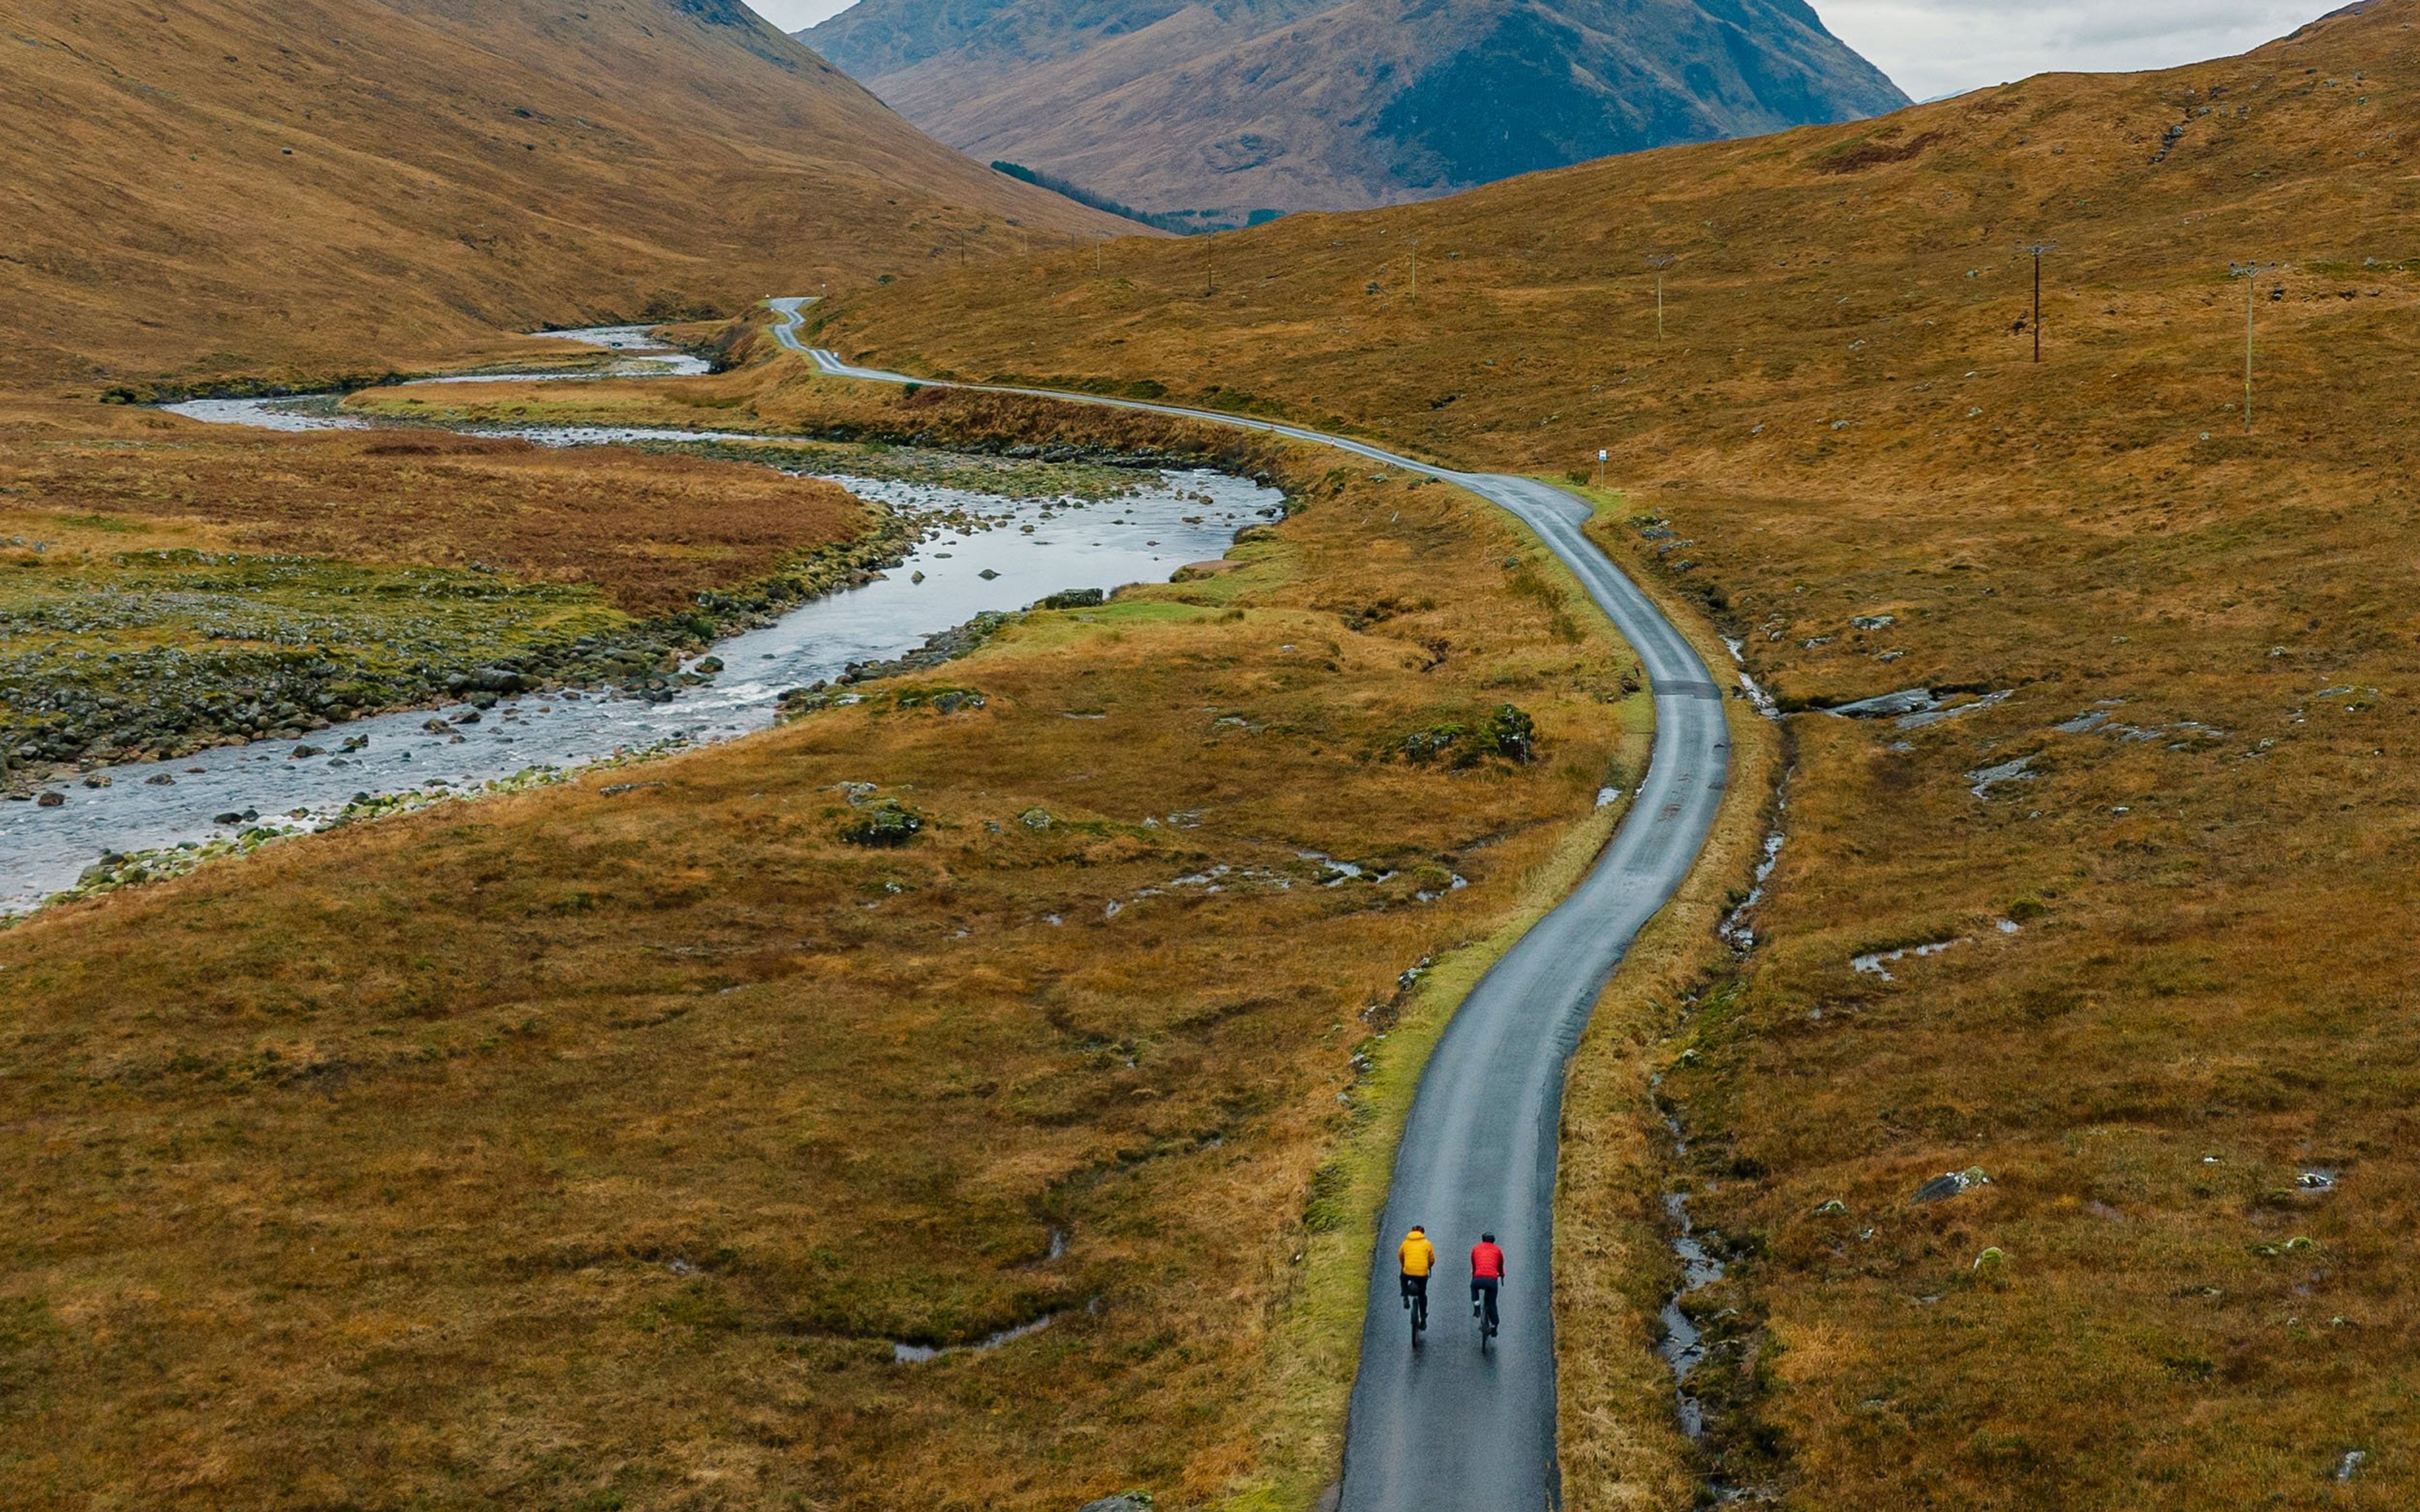 Two adventure cyclists on a single track road in the Scottish Highlands.